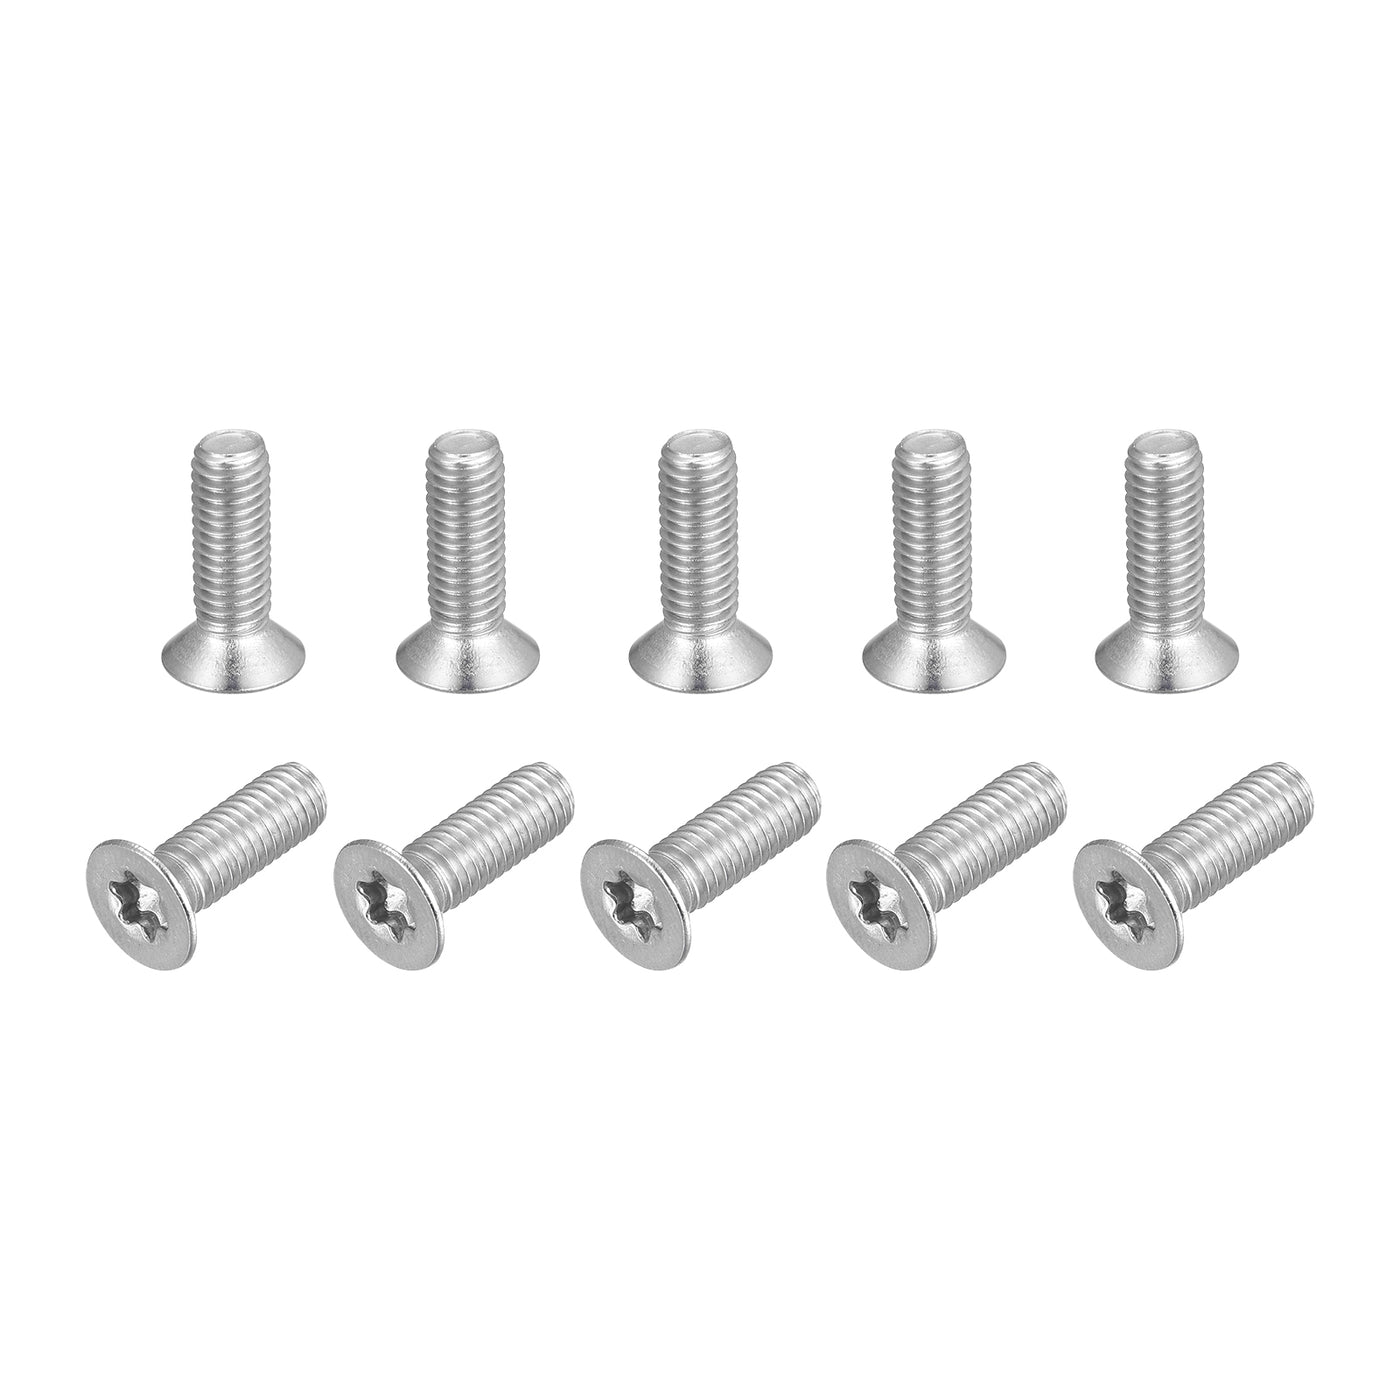 uxcell Uxcell M5x16mm Torx Security Screws, 10pcs 316 Stainless Steel Countersunk Head Screw